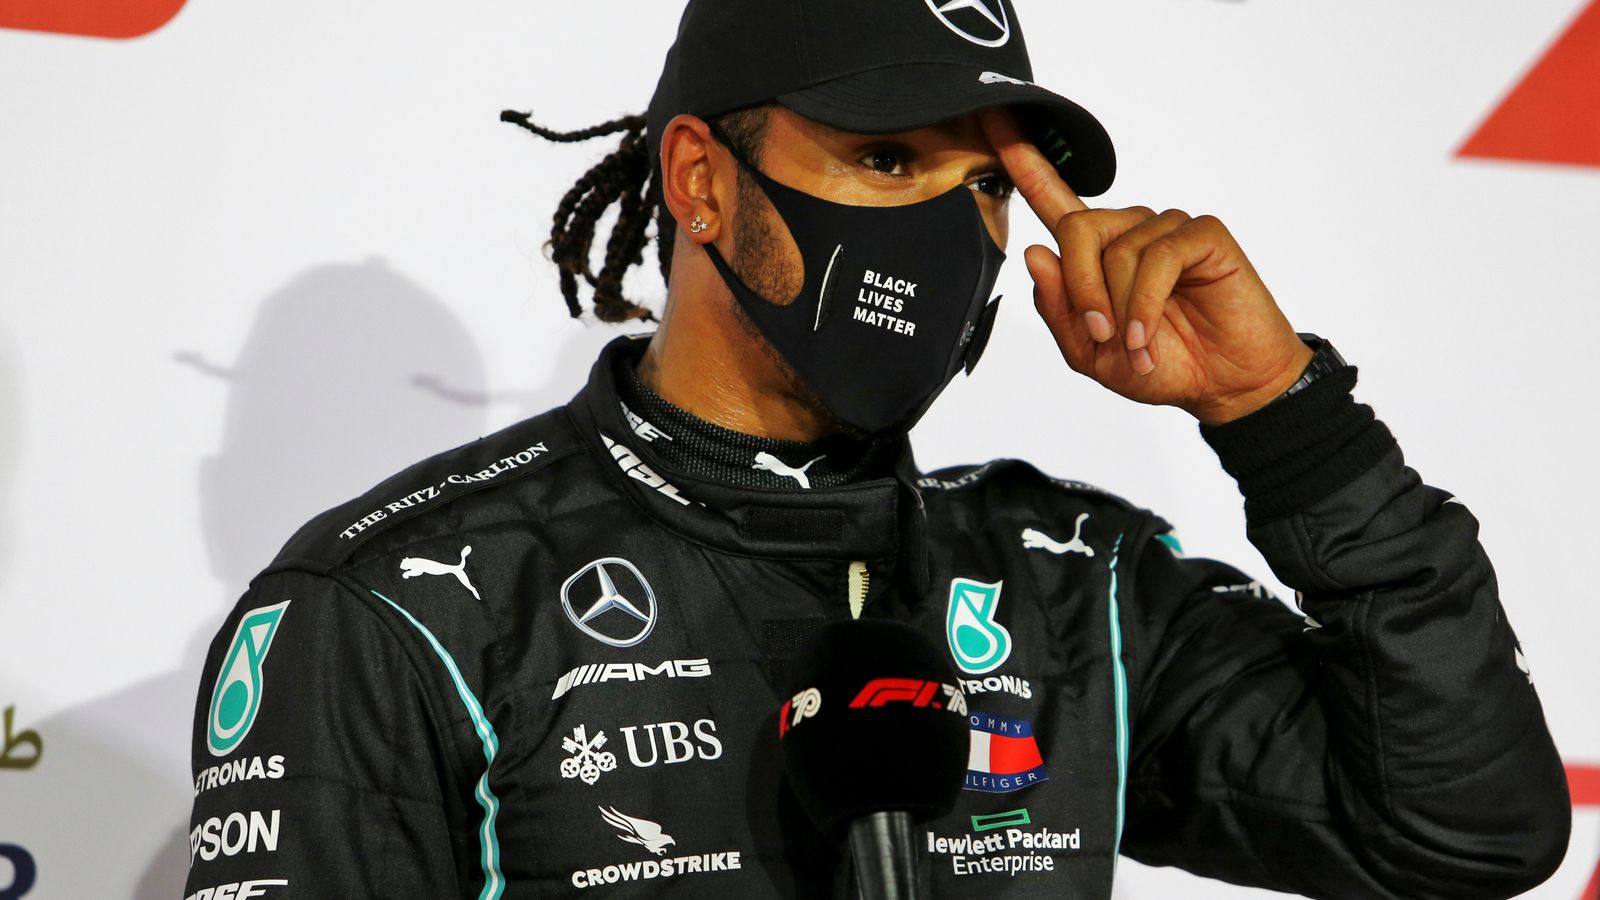 lewis-hamilton-returning-to-f1-for-abu-dhabi-gp-after-negative-covid19-tests